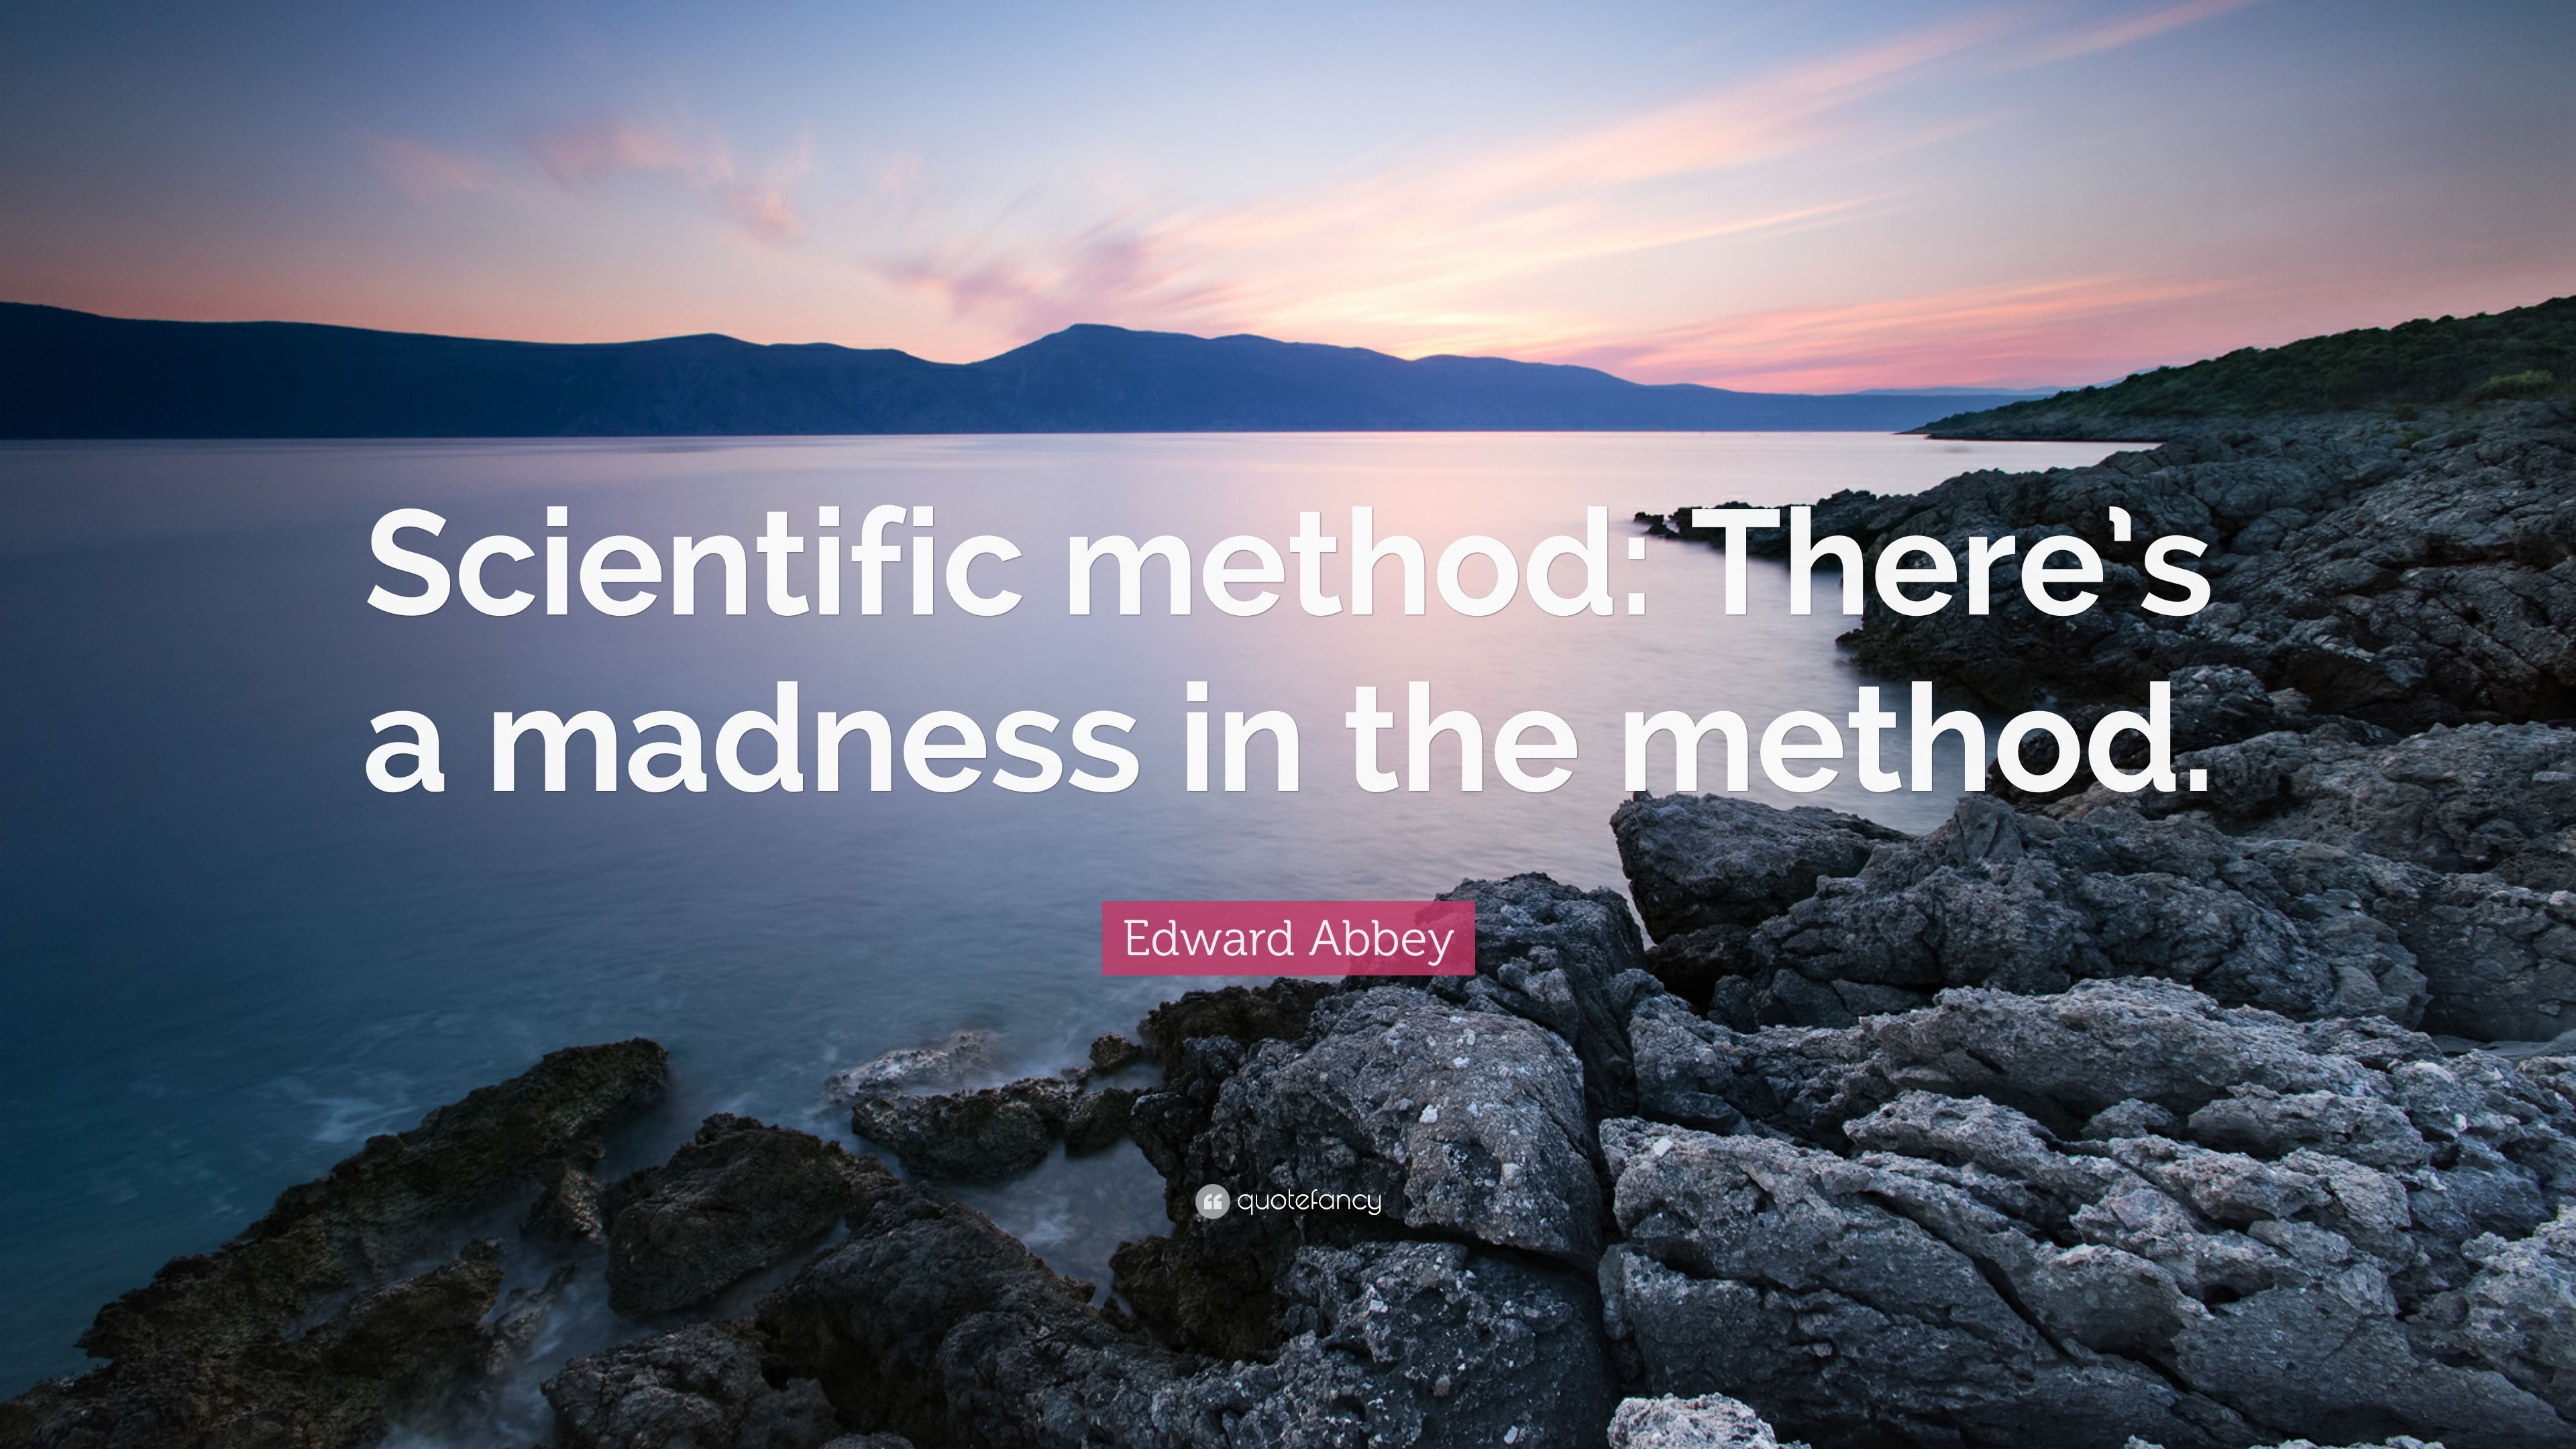 Edward Abbey Quote: “Scientific method: There's a madness in the method.” (7 wallpaper)